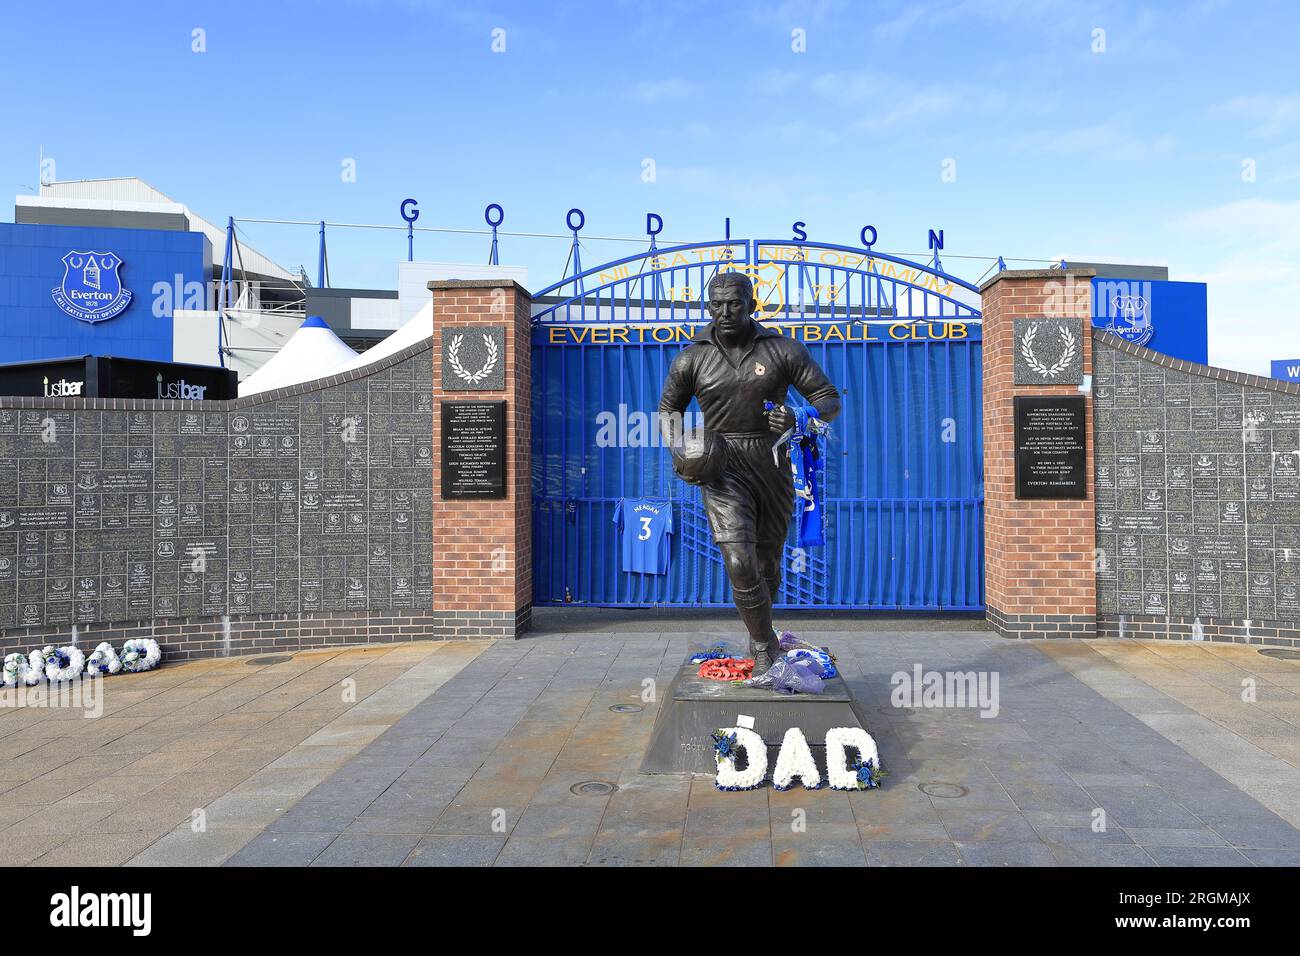 A statue of Dixie Dean footballer and goalscorer outside Goodison Park in England.  It celebrates his contribution to Everton Football Club. Stock Photo